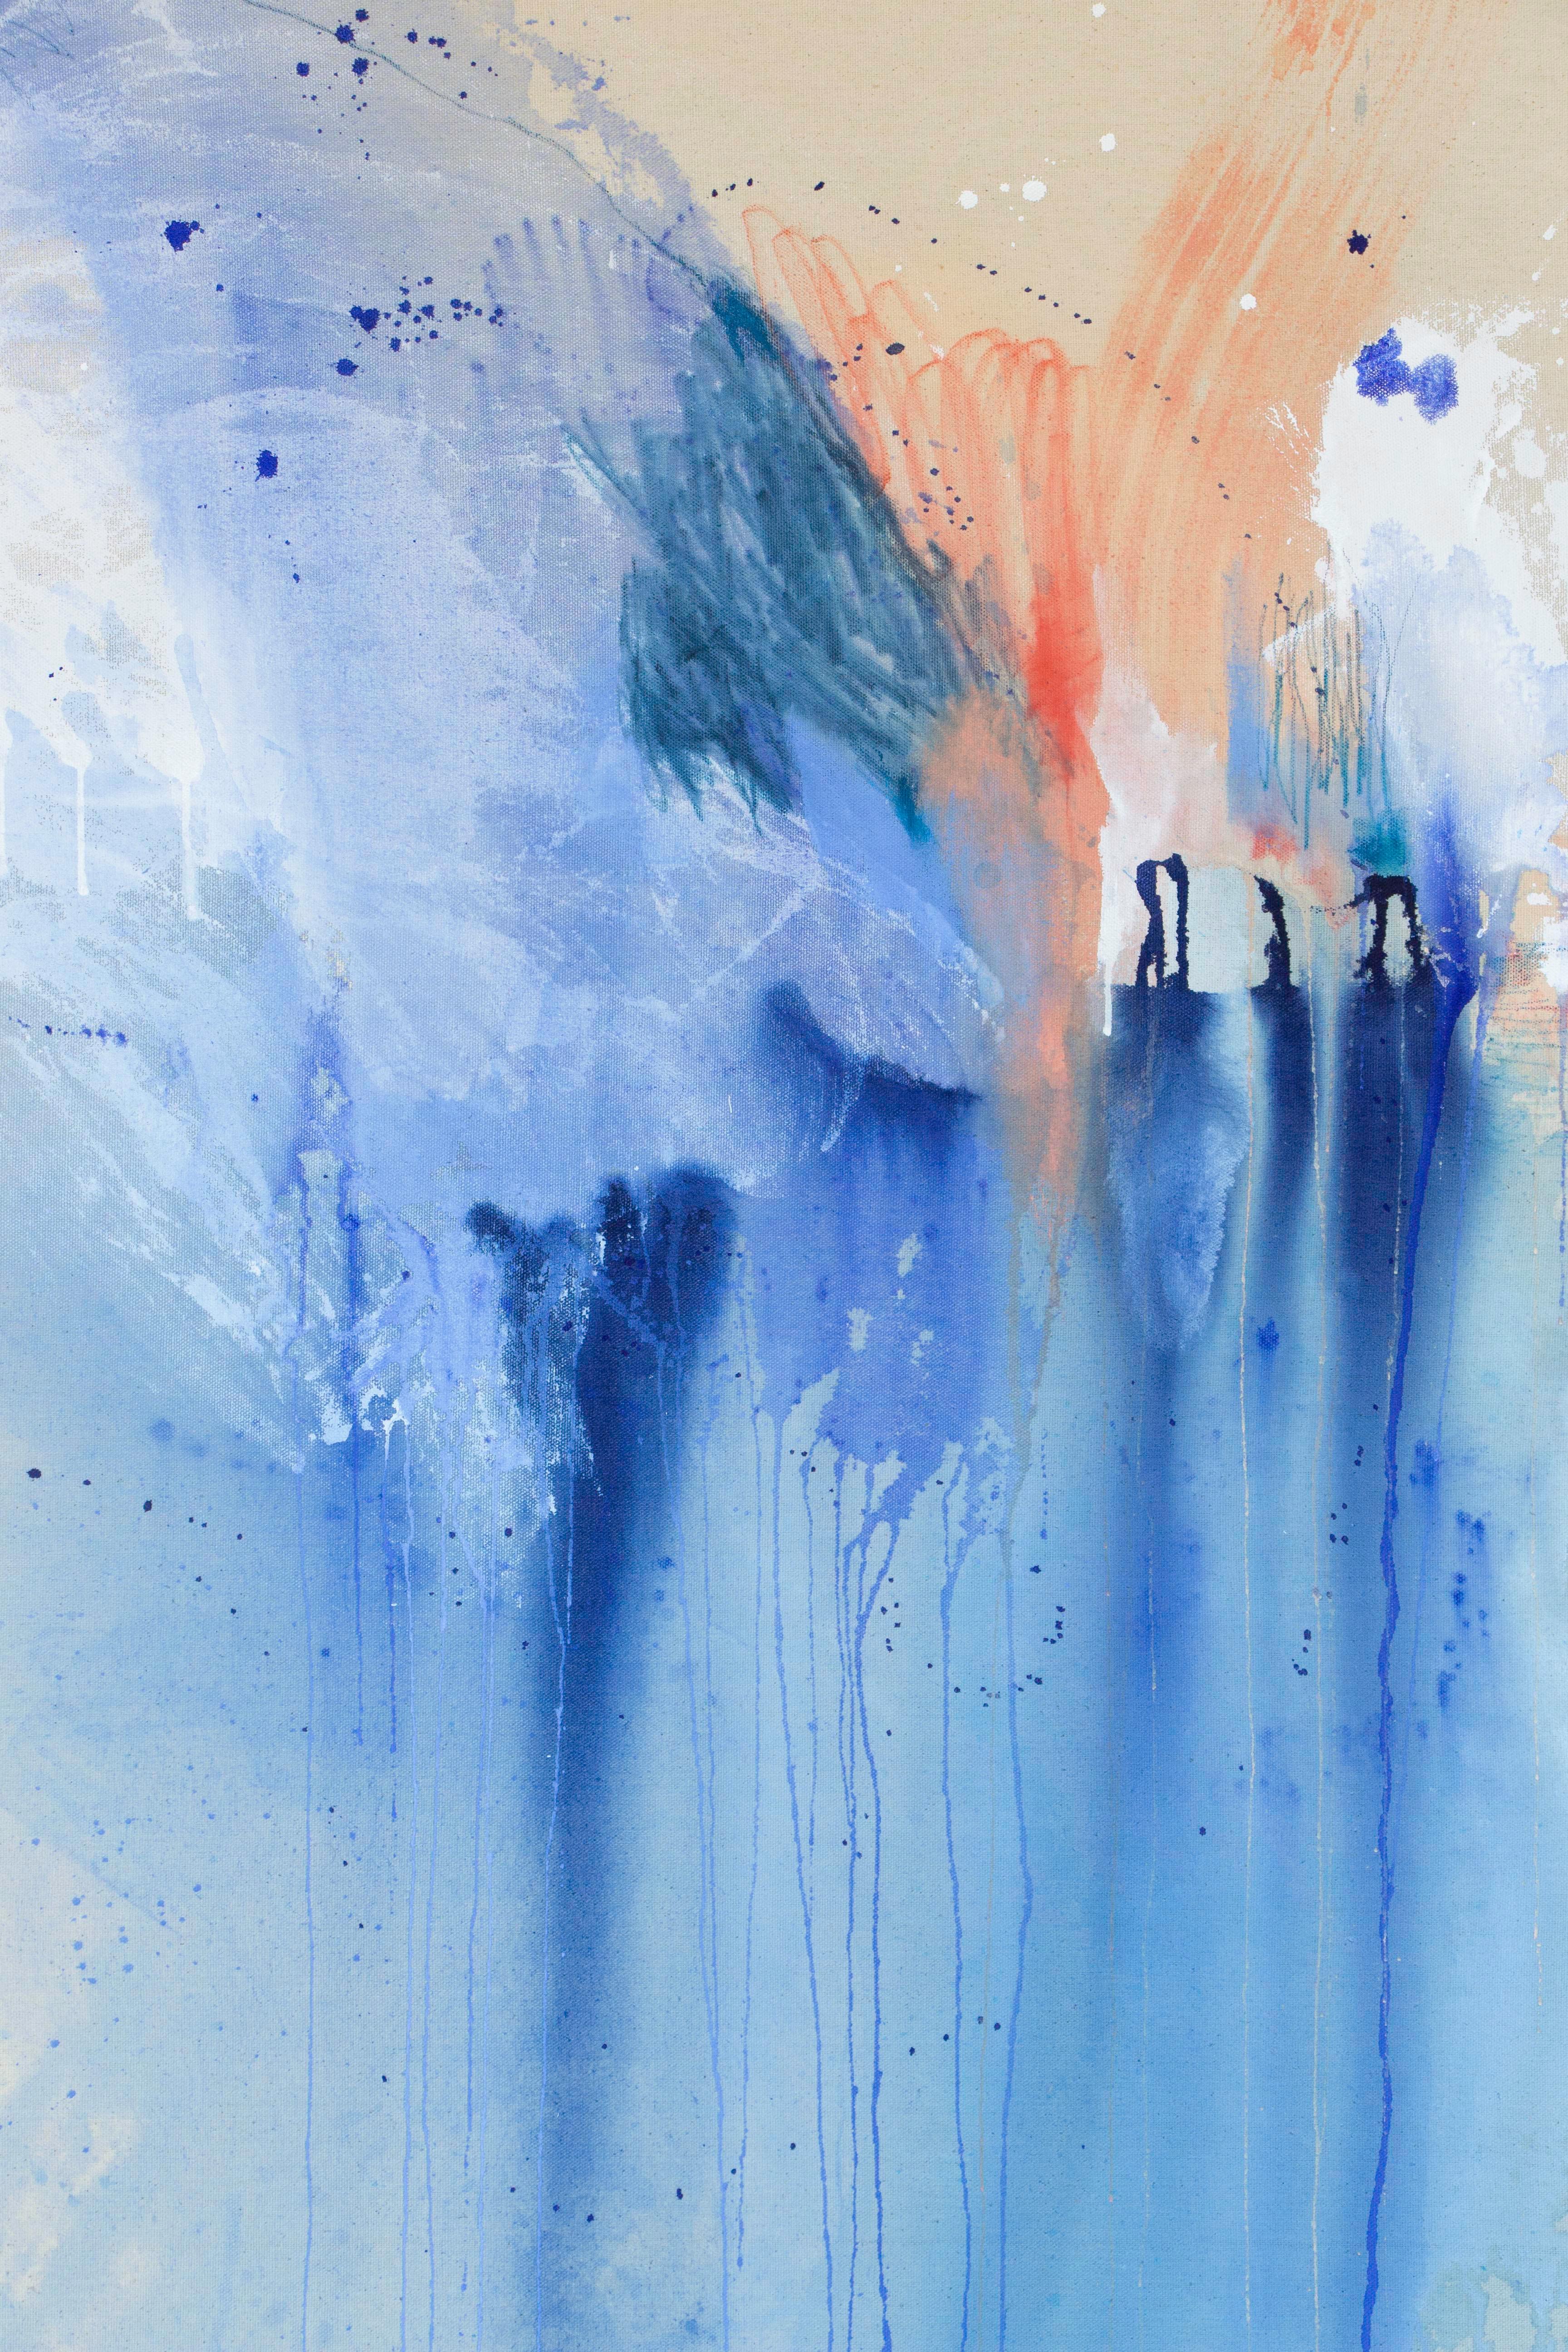 'All the Time' - a beautiful contemporary abstract art from the emerging American artist - Rebecca Stern. It is a mixed media (acrylic, ink) painting on raw canvas with an elegant design. Vibrant blue and orange color palette create dynamic